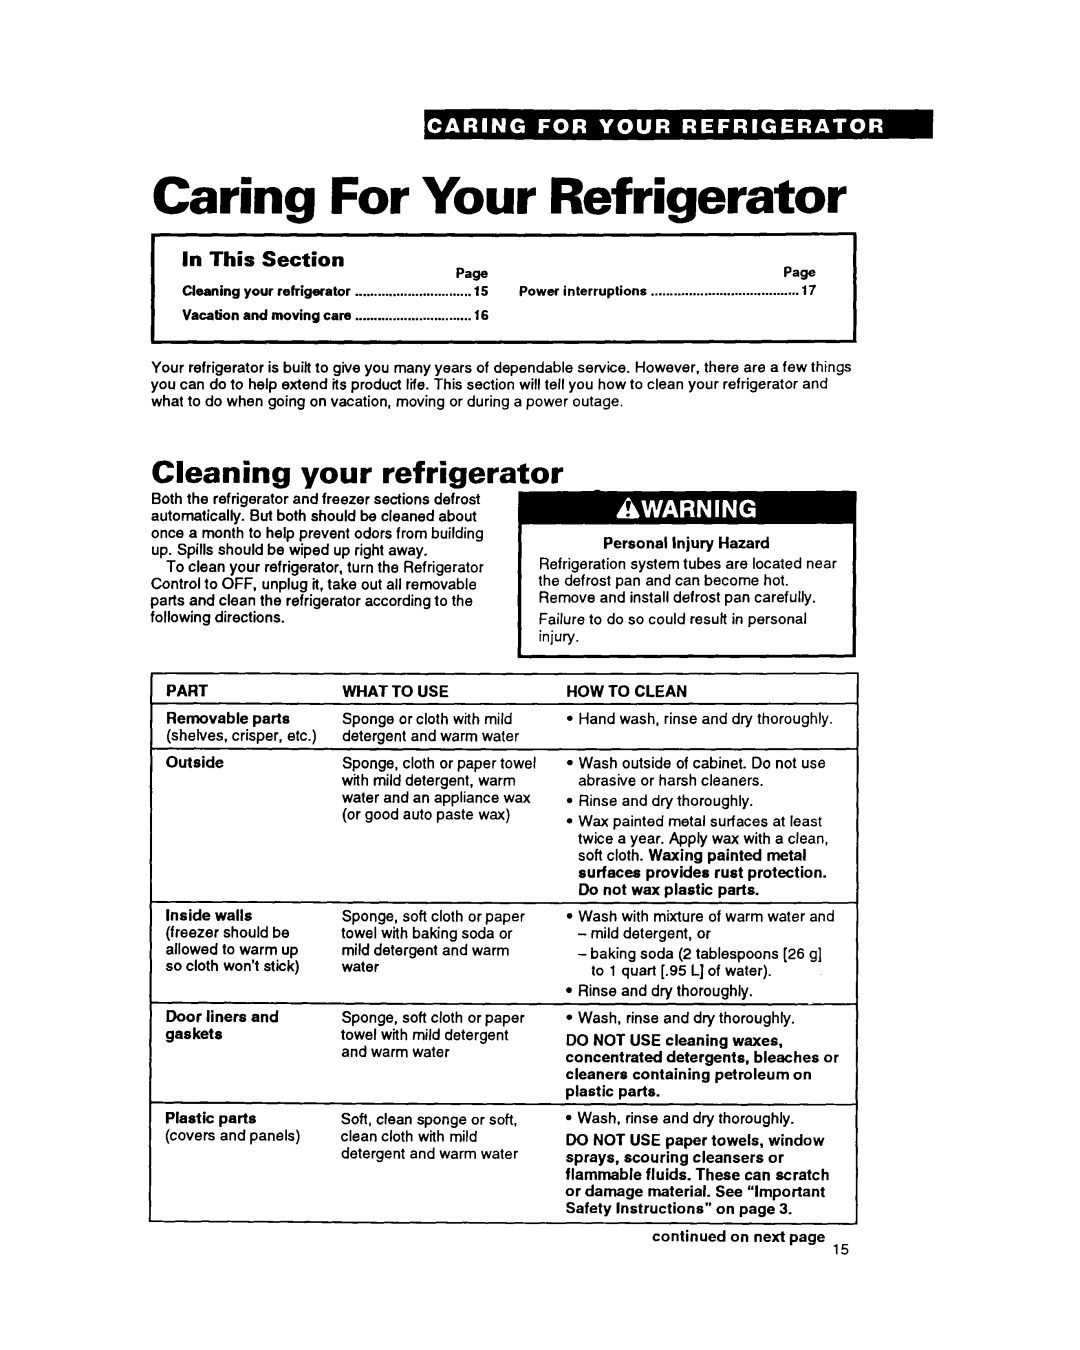 Whirlpool ET25DM warranty Caring For Your Refrigerator, Cleaning your refrigerator, In This Section PagePage 